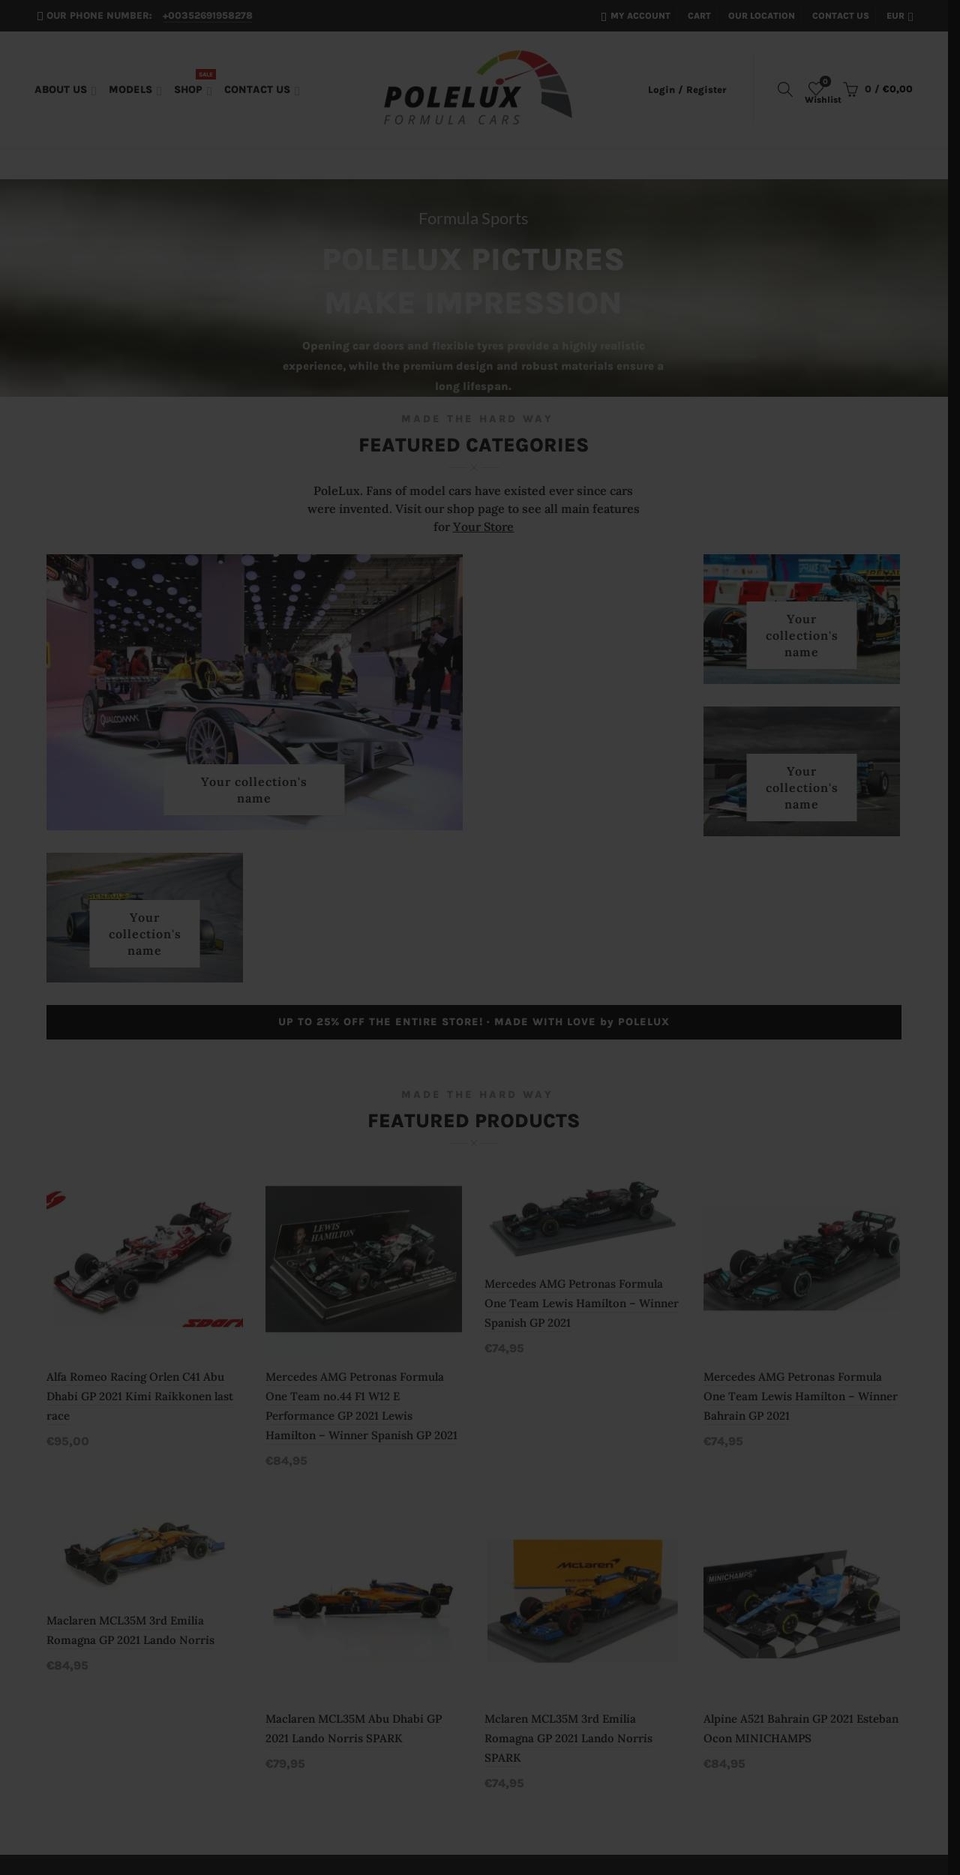 basel Shopify theme site example polelux.com